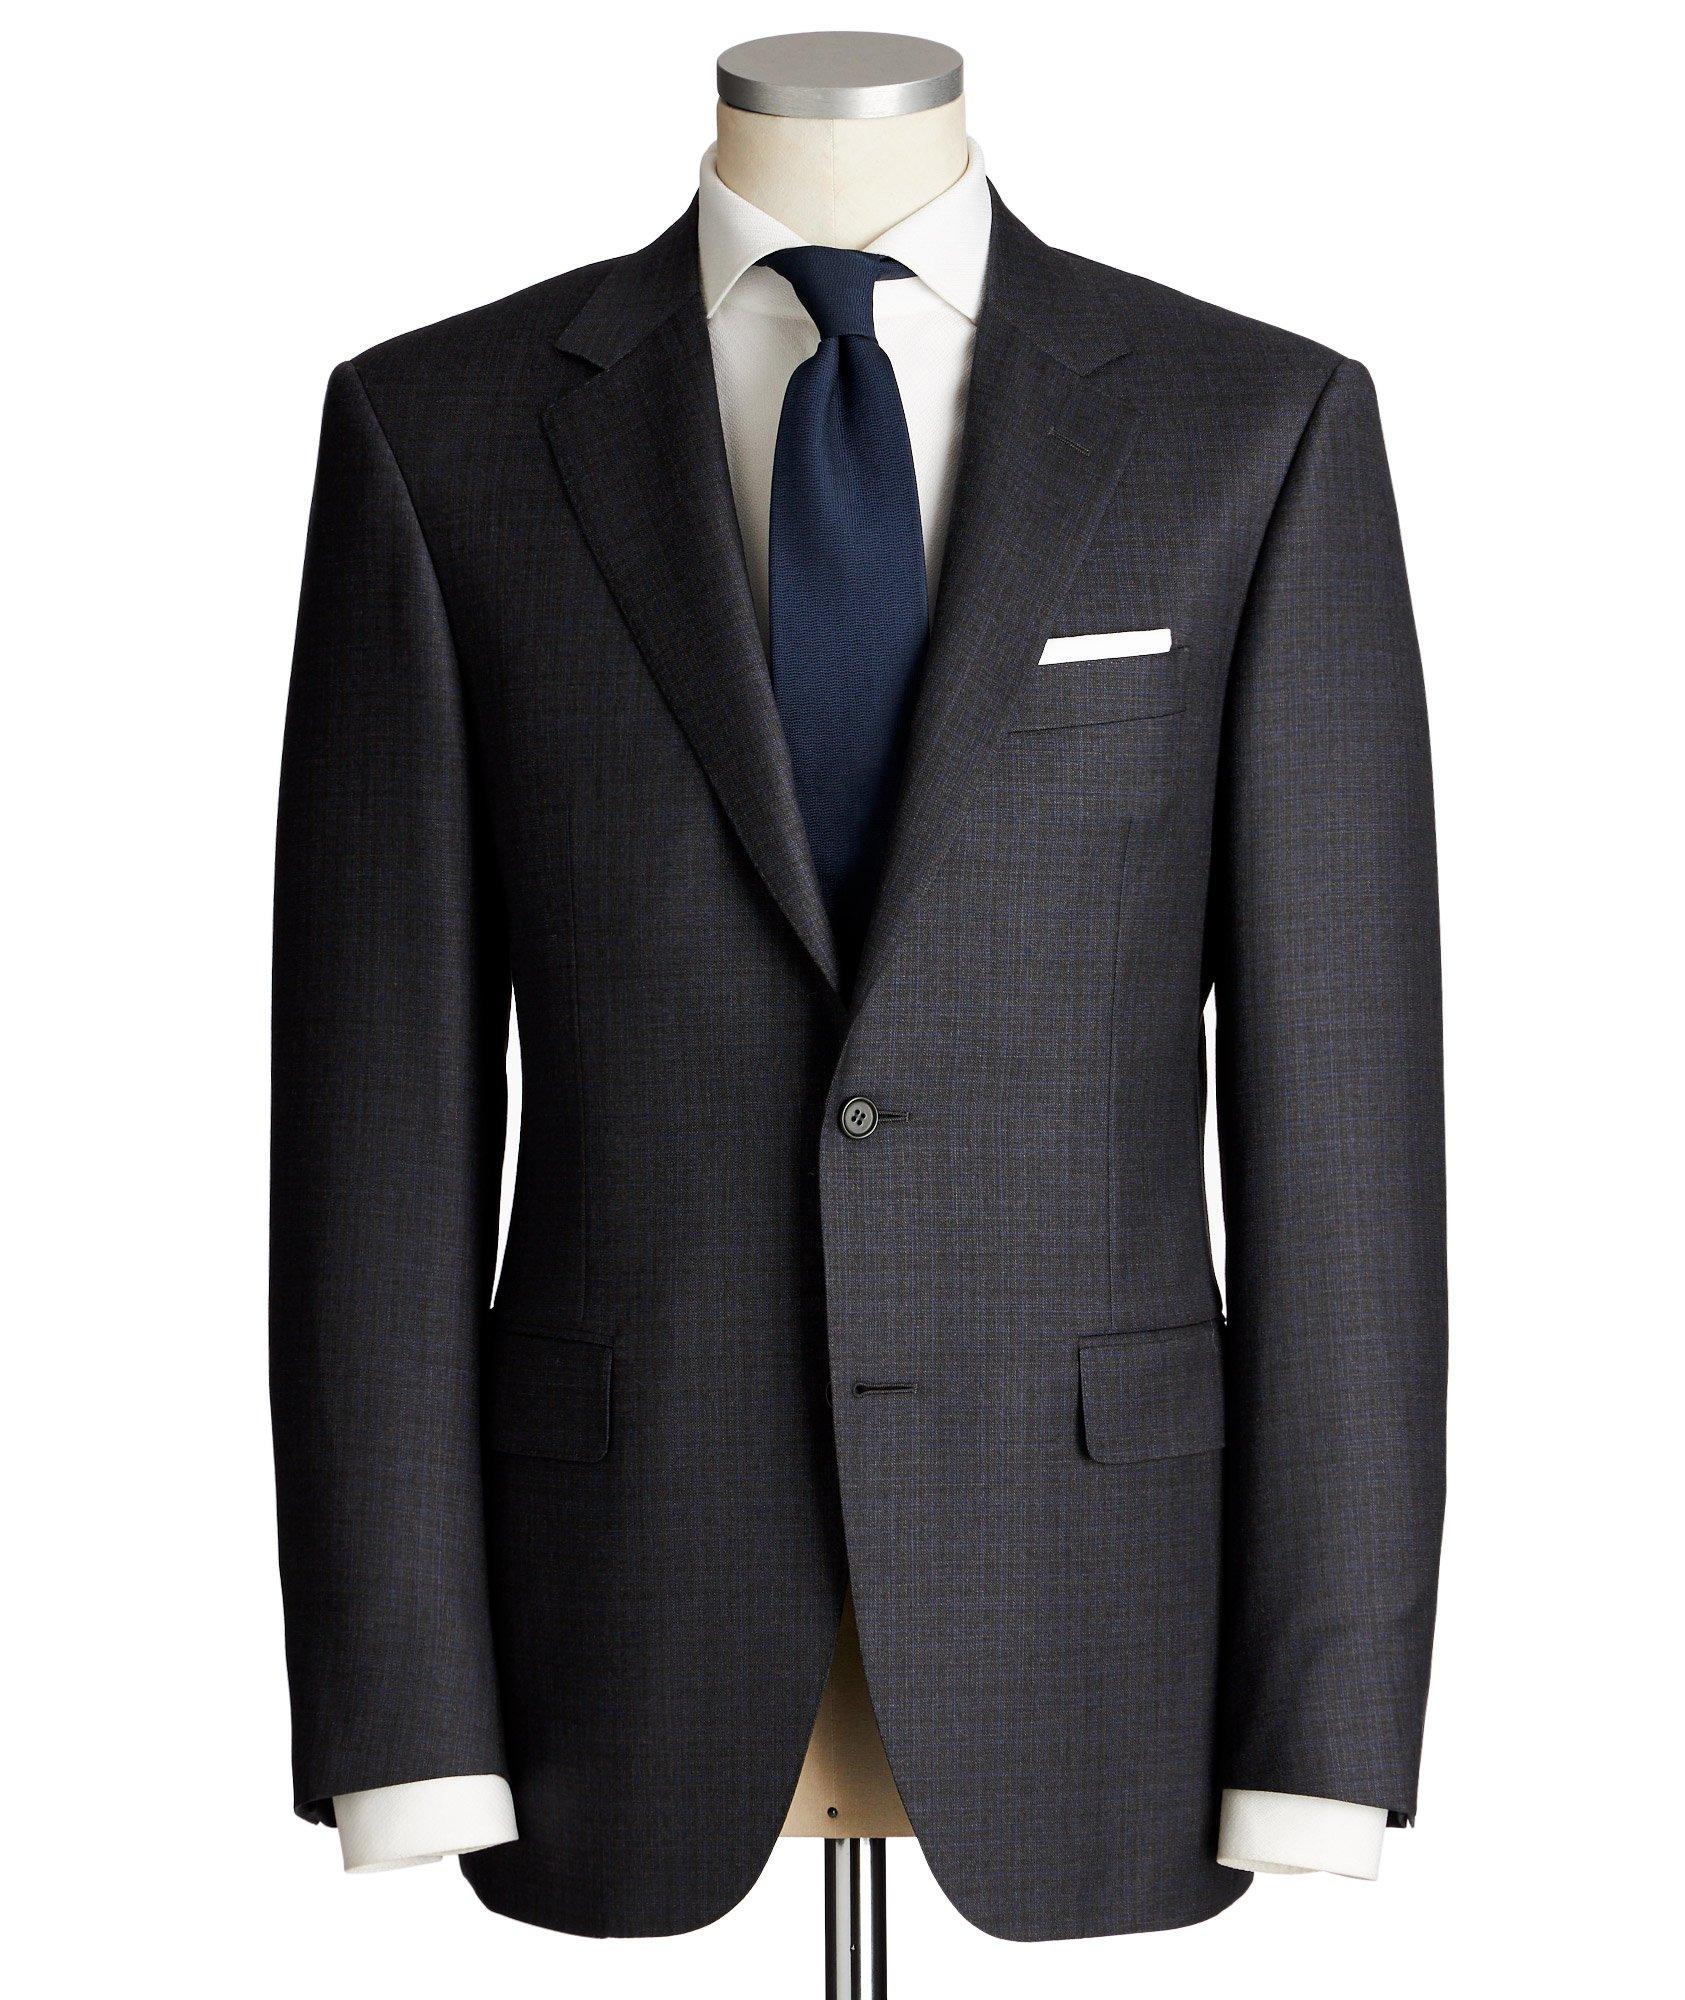 armani suits cost